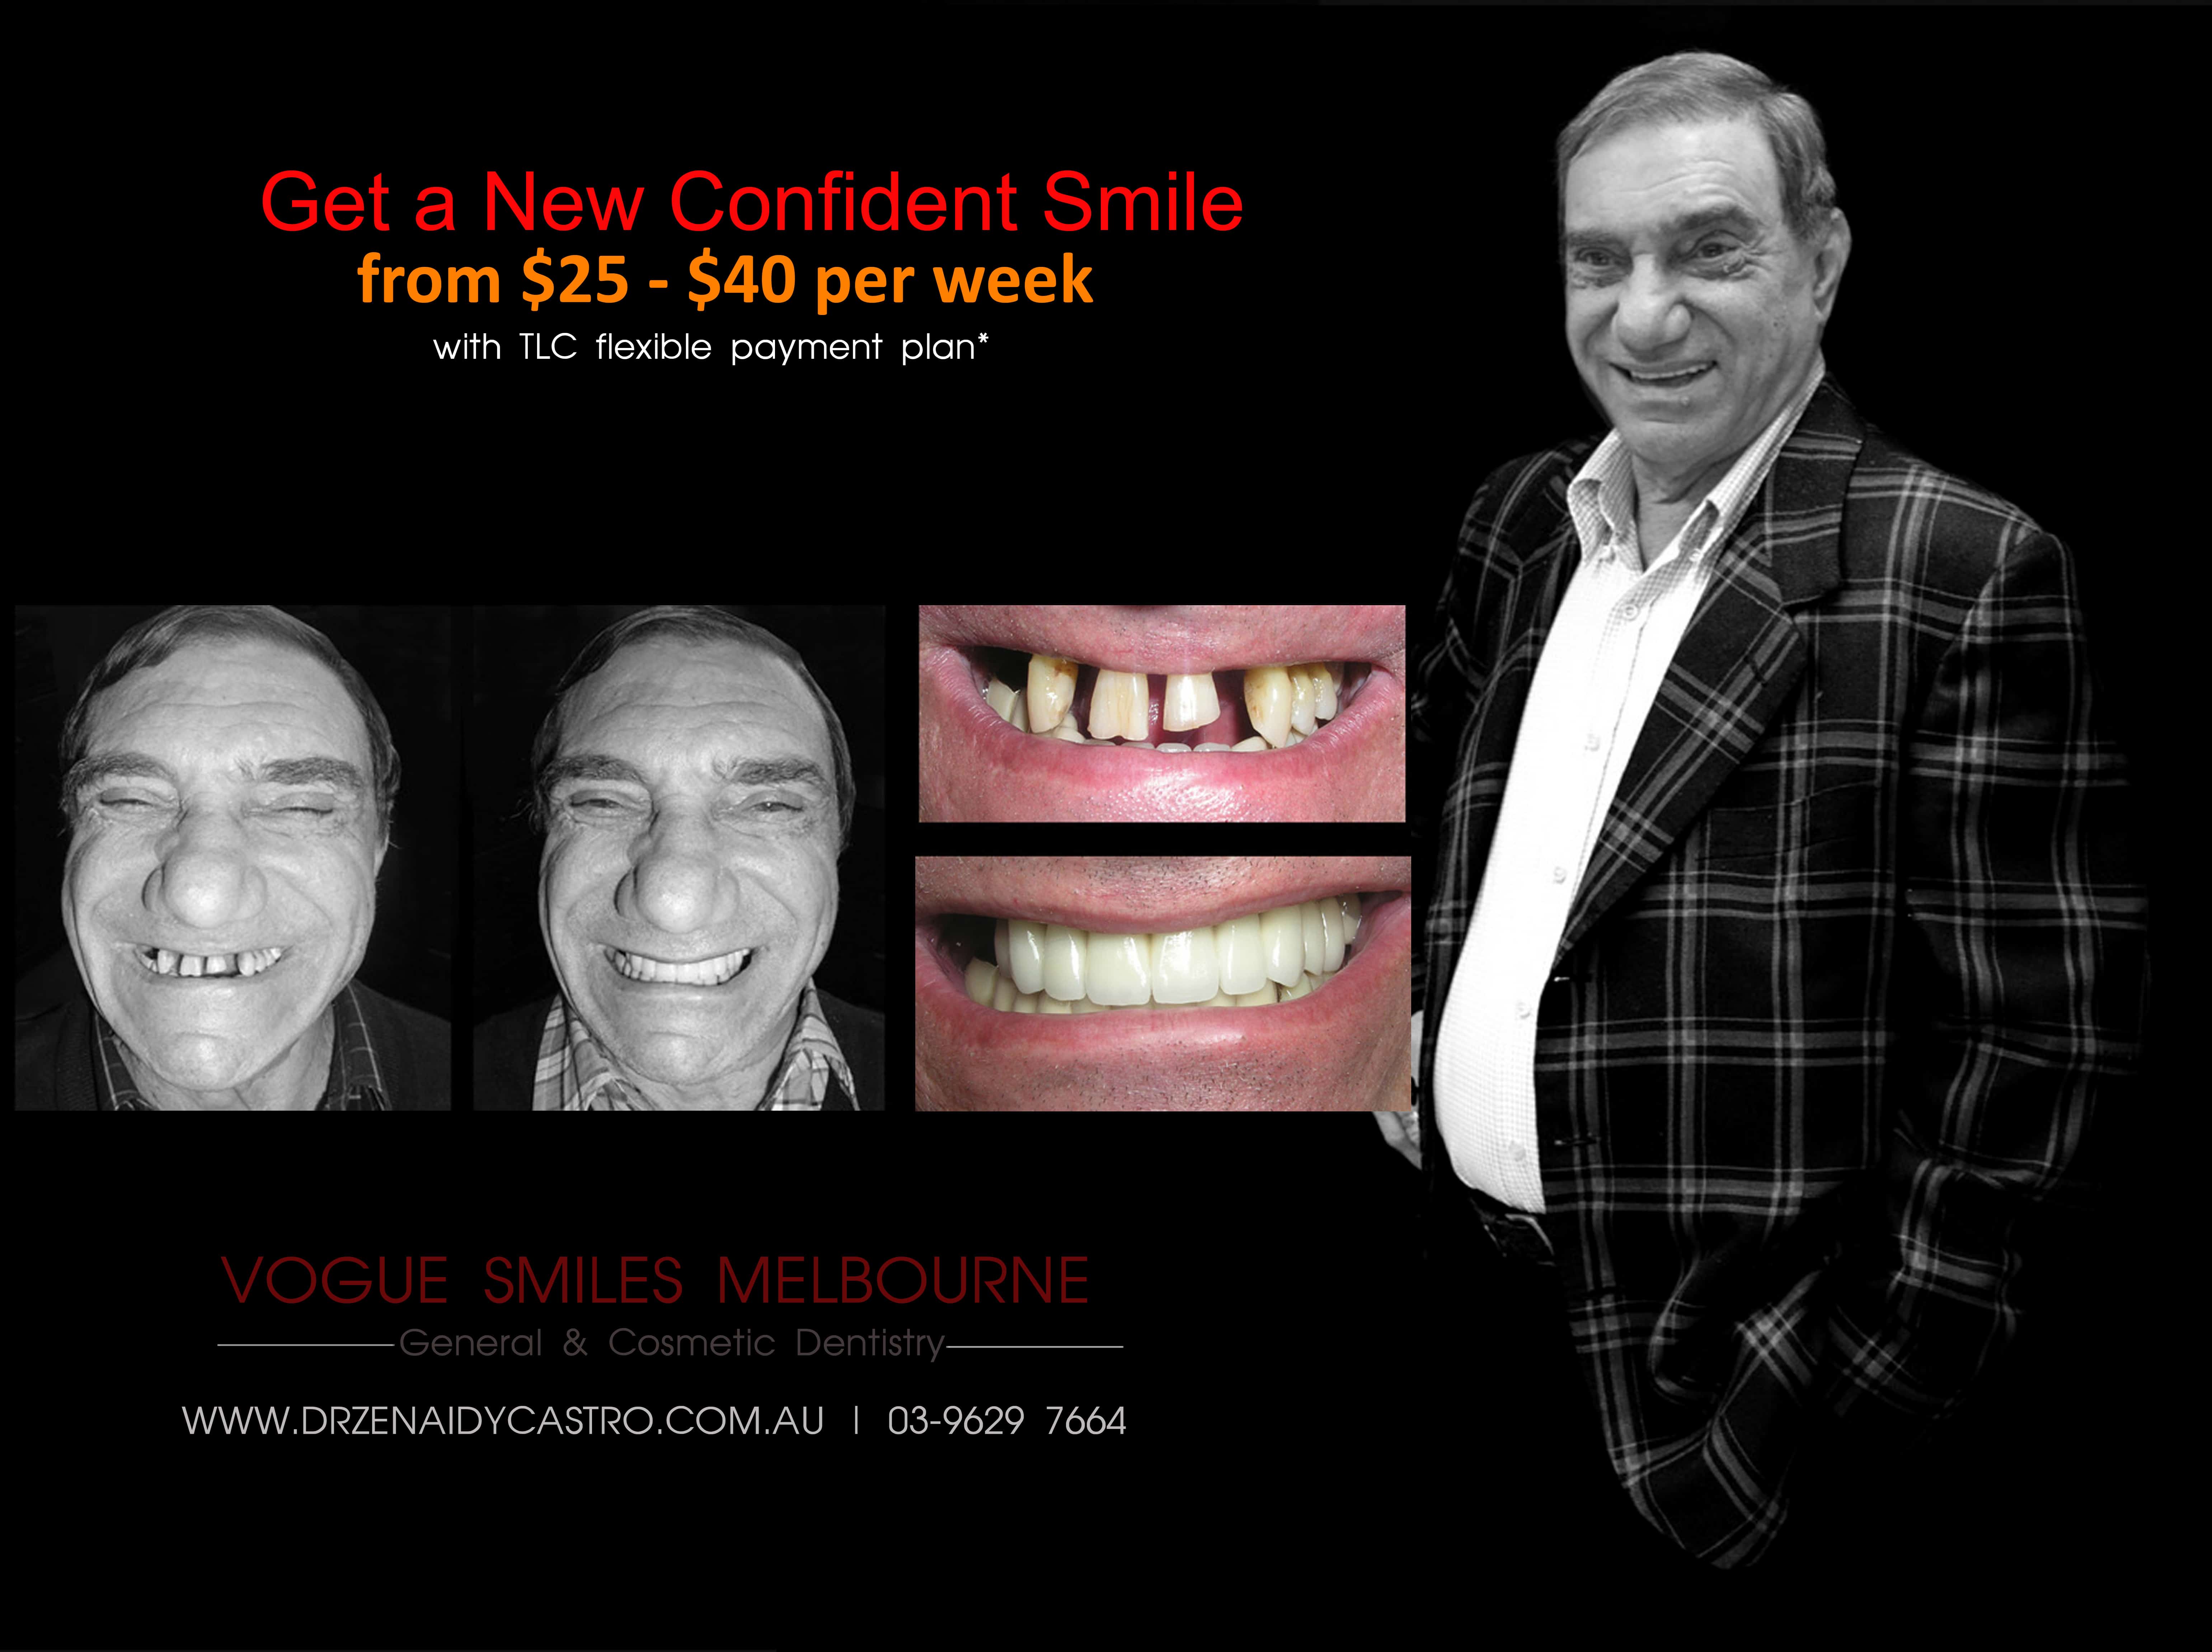 Smile Makeover Facelift Procedures in Melbourne | Non-Surgical Facelift with Porcelain Veneers